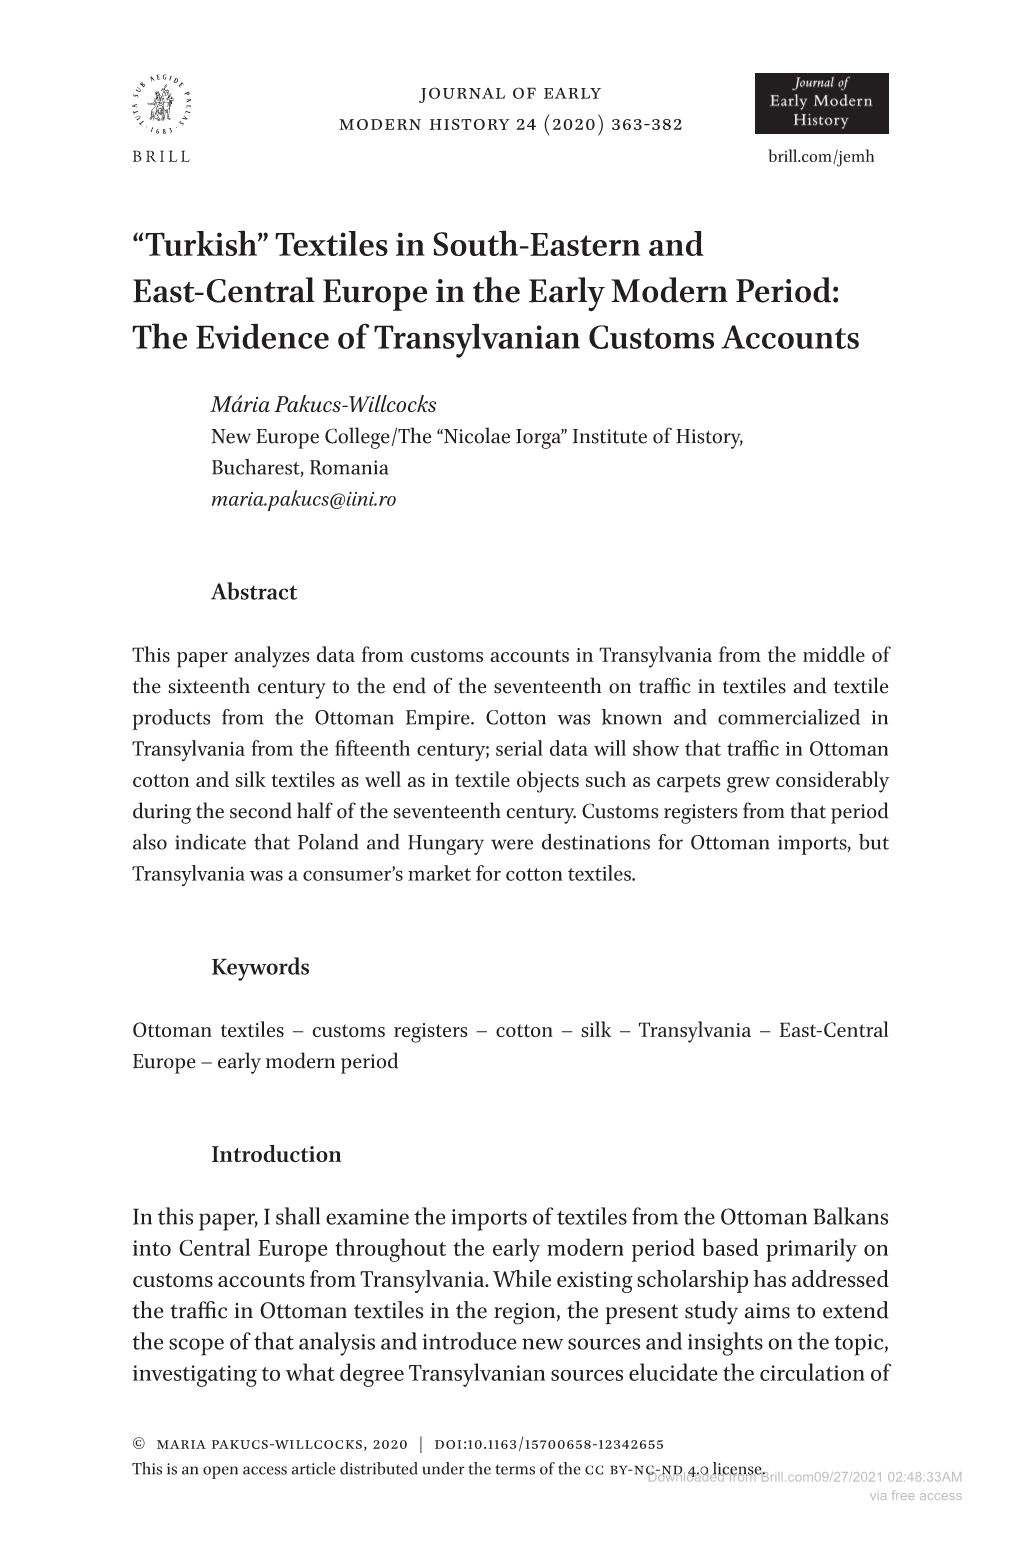 Textiles in South-Eastern and East-Central Europe in the Early Modern Period: the Evidence of Transylvanian Customs Accounts